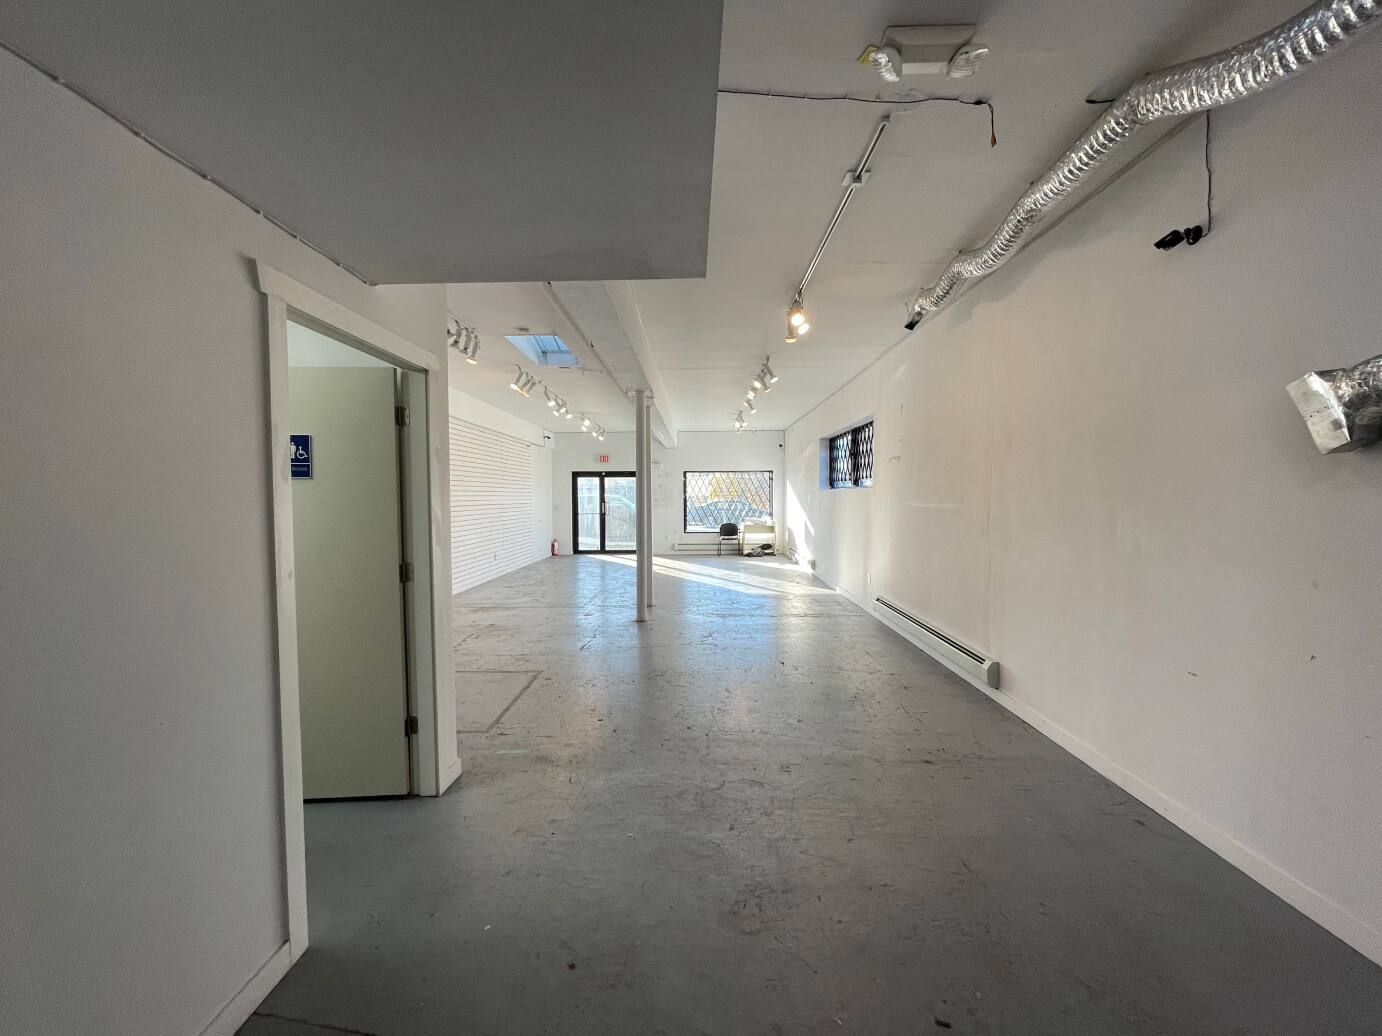 3303 East Broadway Vancouver interiors picture Retail opportunity for lease by LUK commercial real estate group